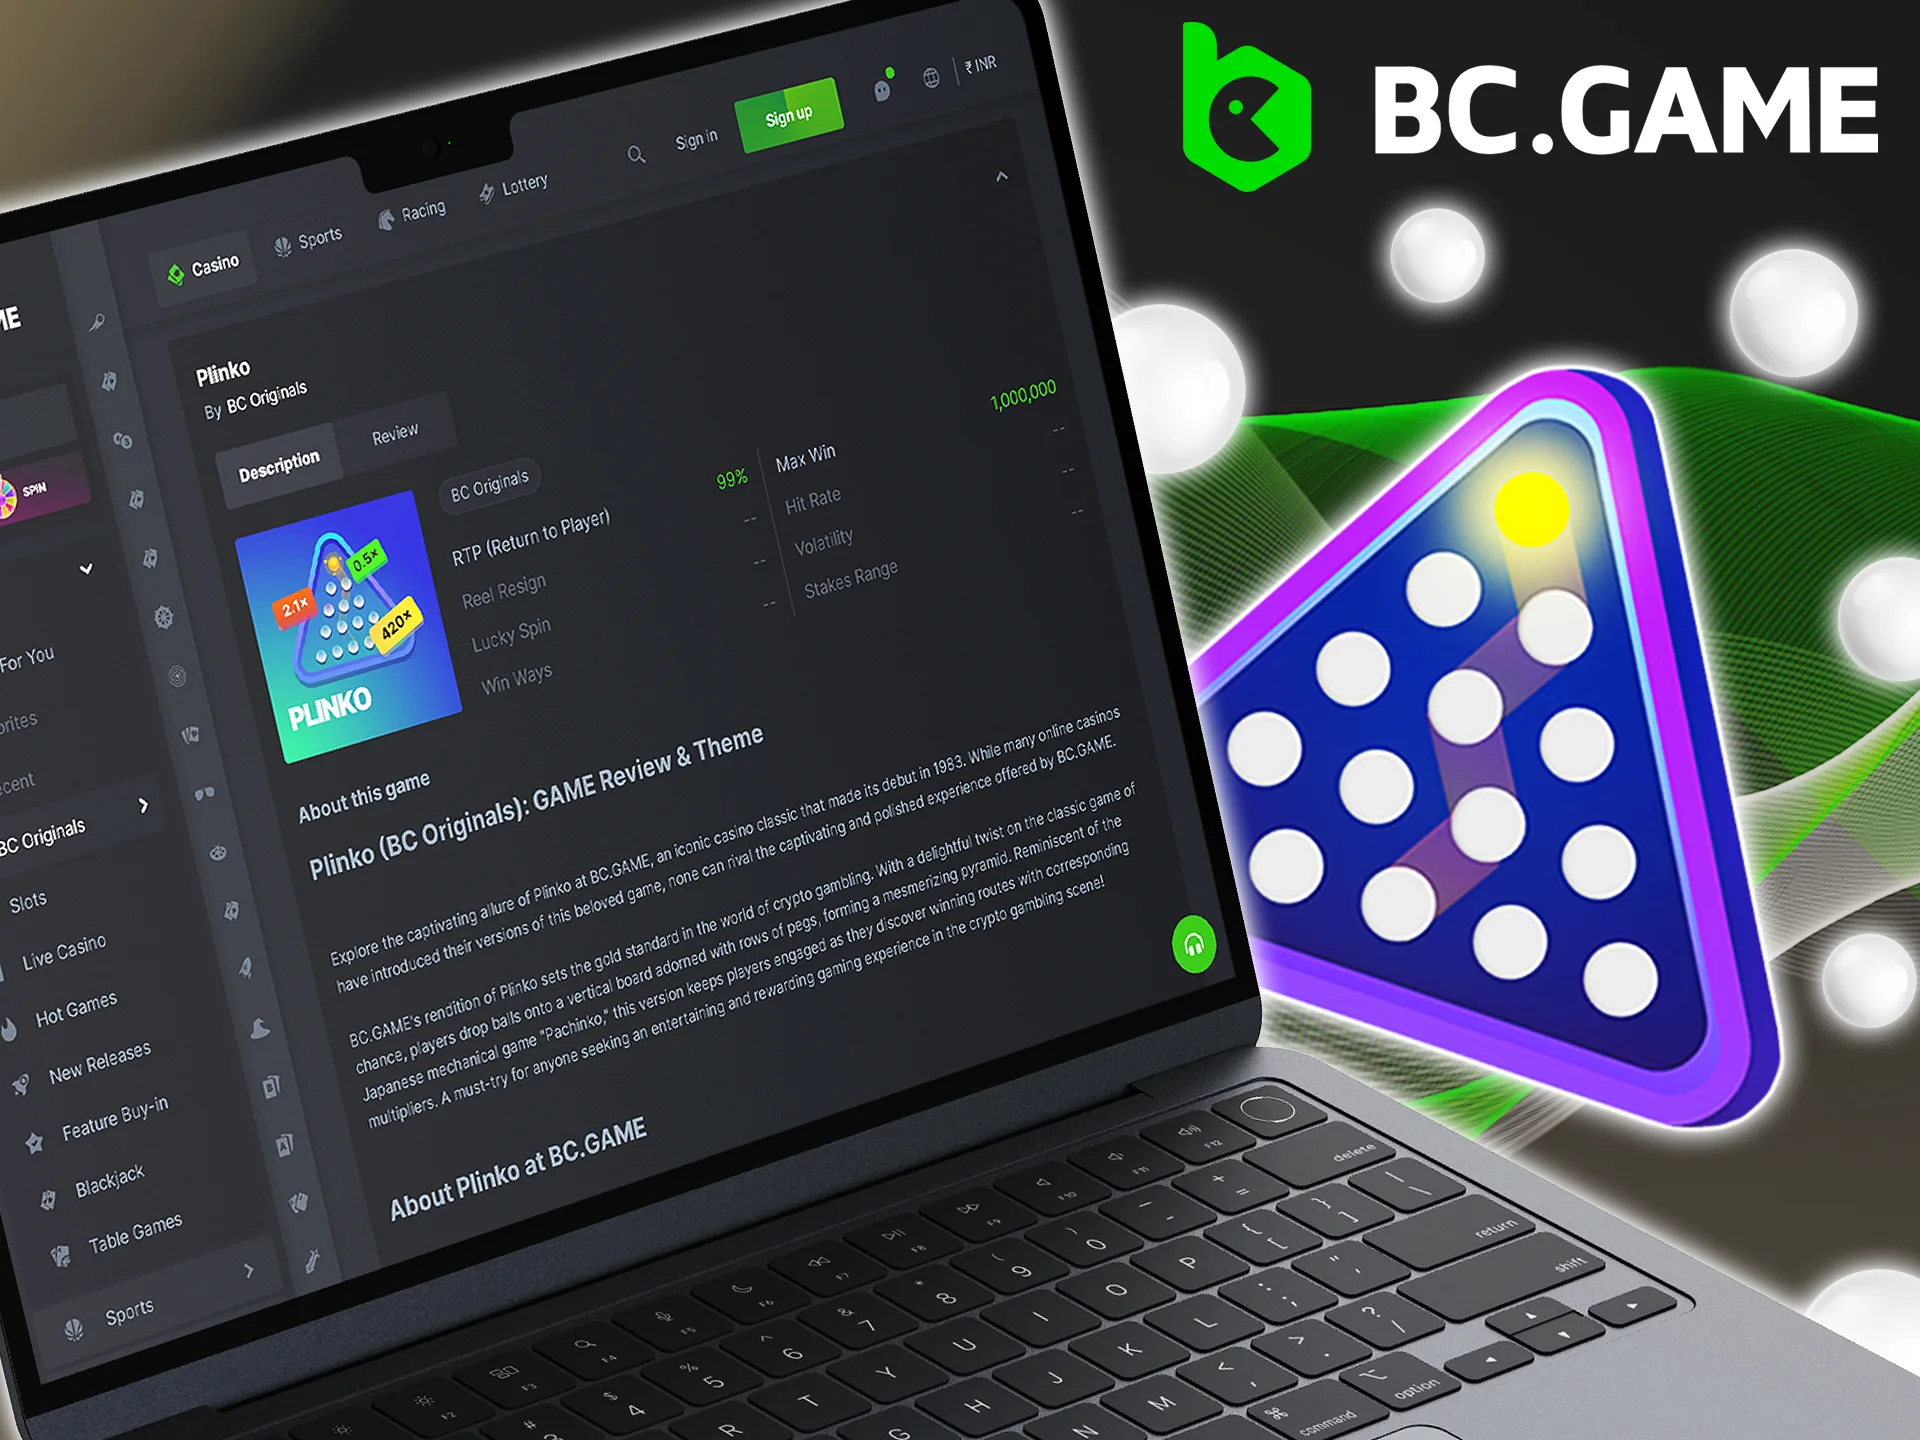 Join BC Game, play Plinko, win and collect your winnings.